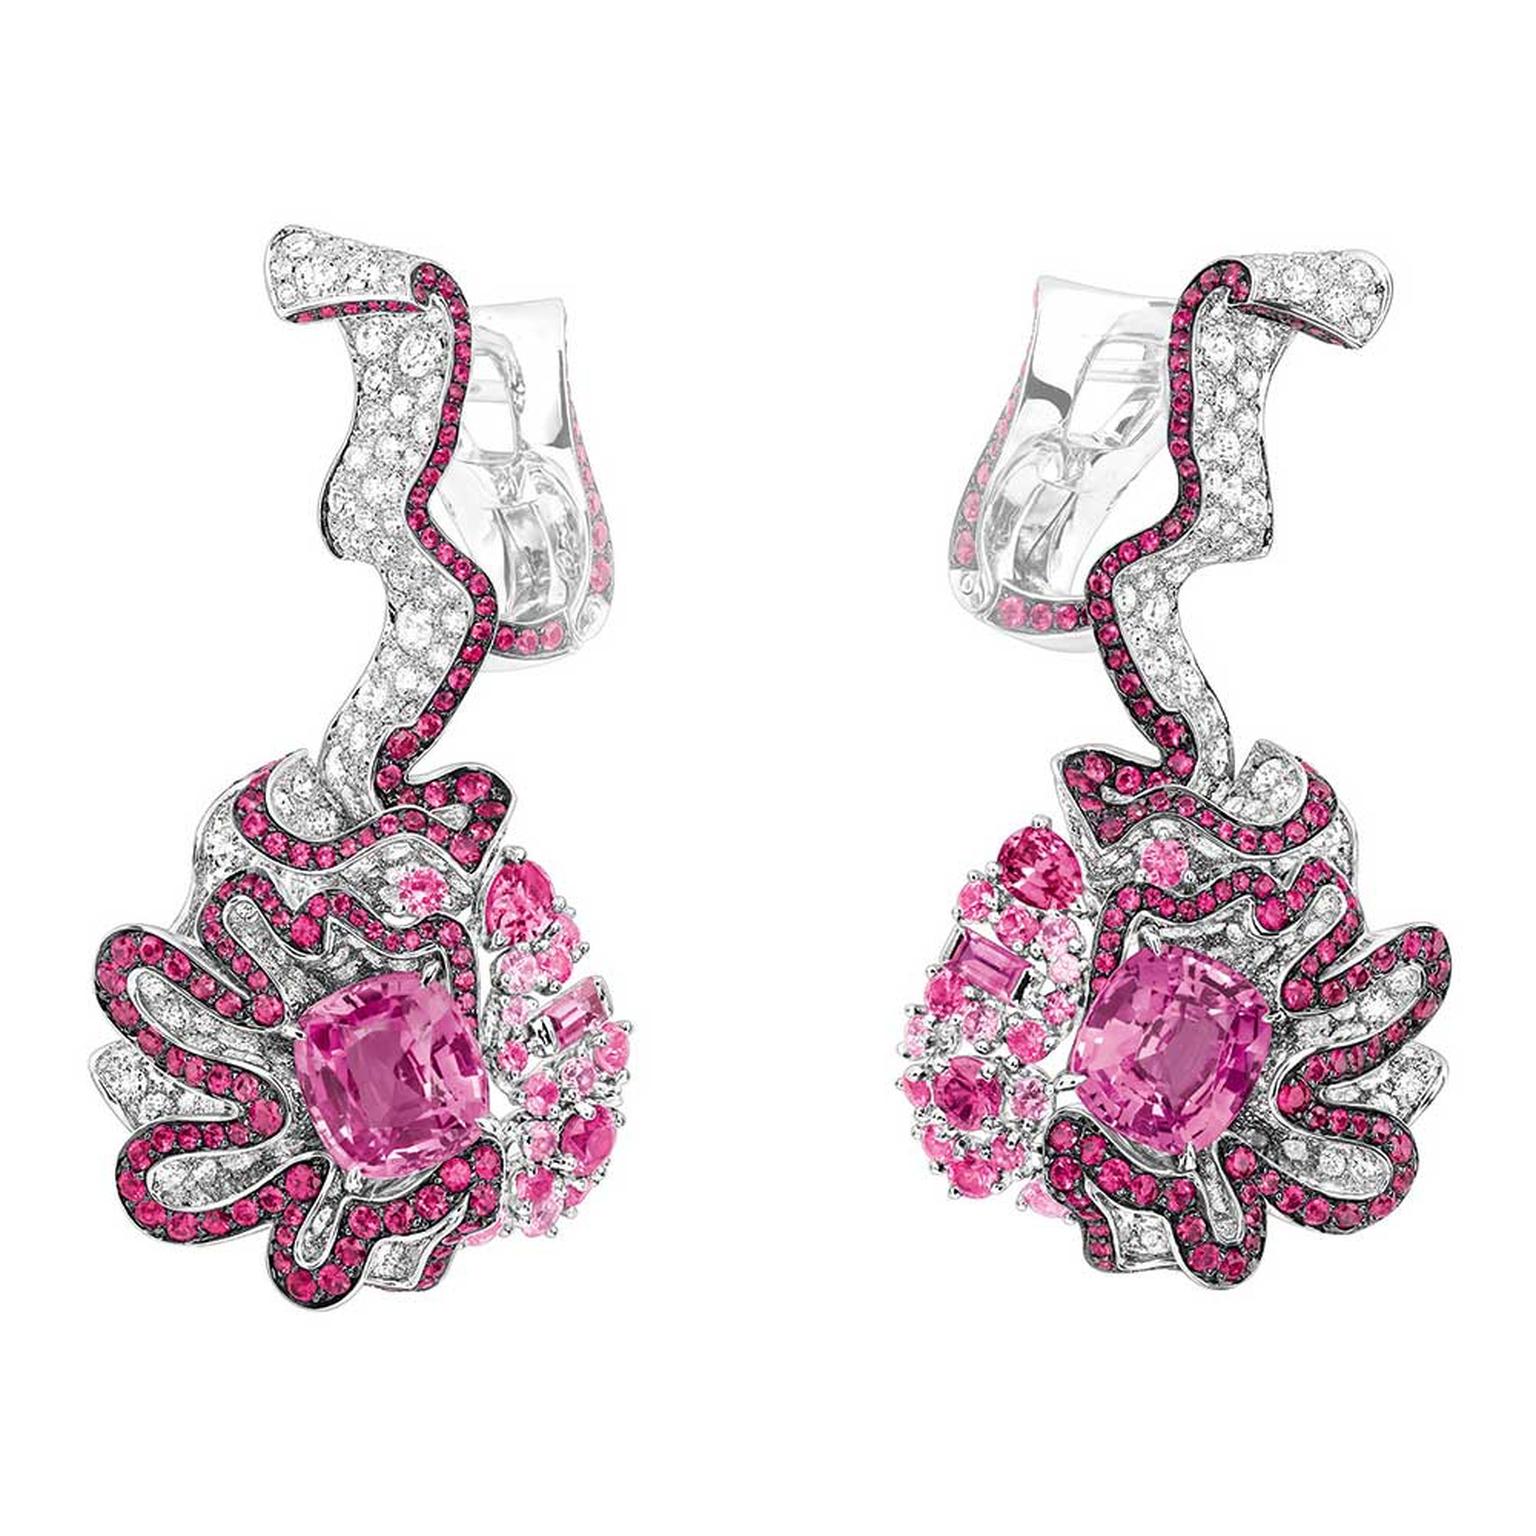 Dior earrings with pink sapphires